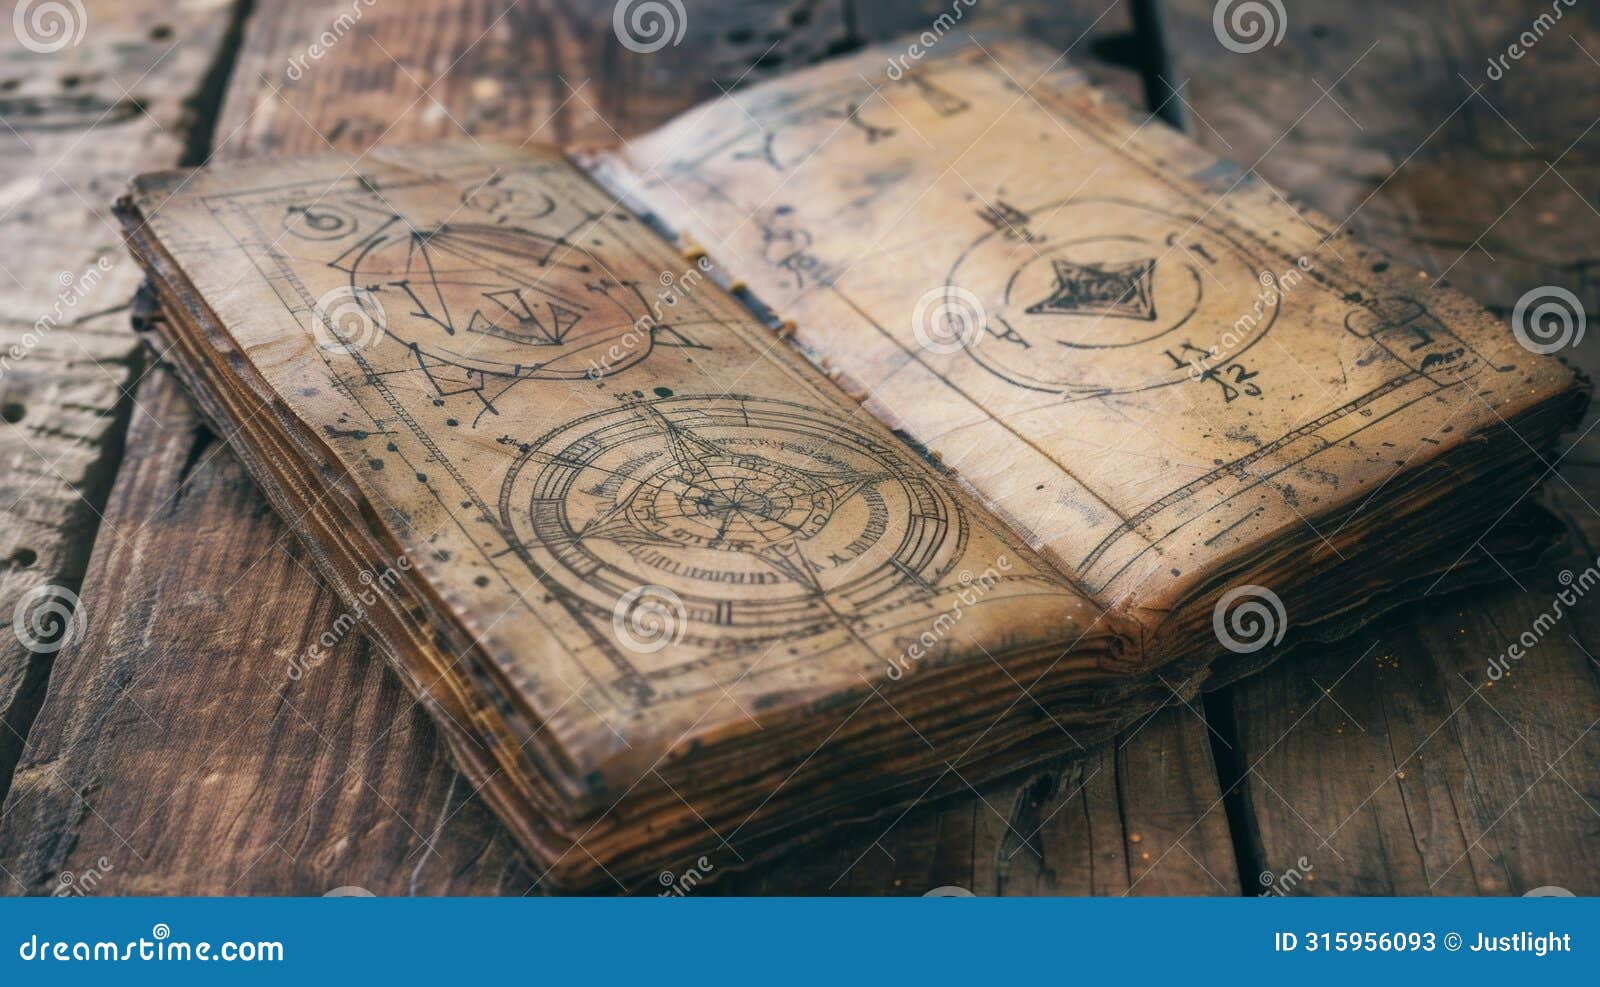 an old worn leather journal sits open on a weathered wooden table adorned with sketches of tarot spreads and cryptic